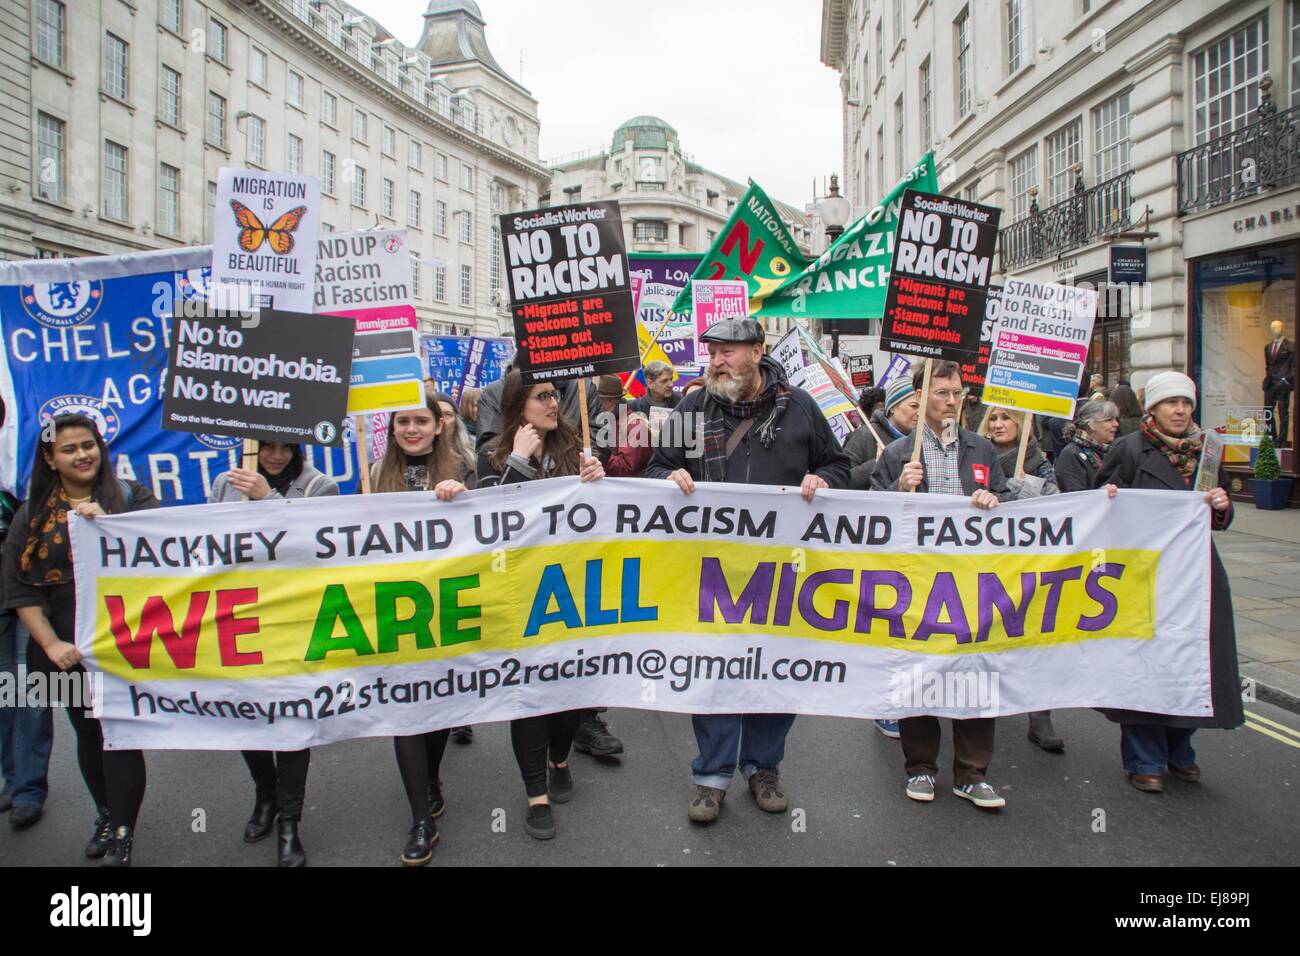 London UK, 21st March 2015: Protesters at the Stand Up To Racism & Fascism demonstration. Stock Photo